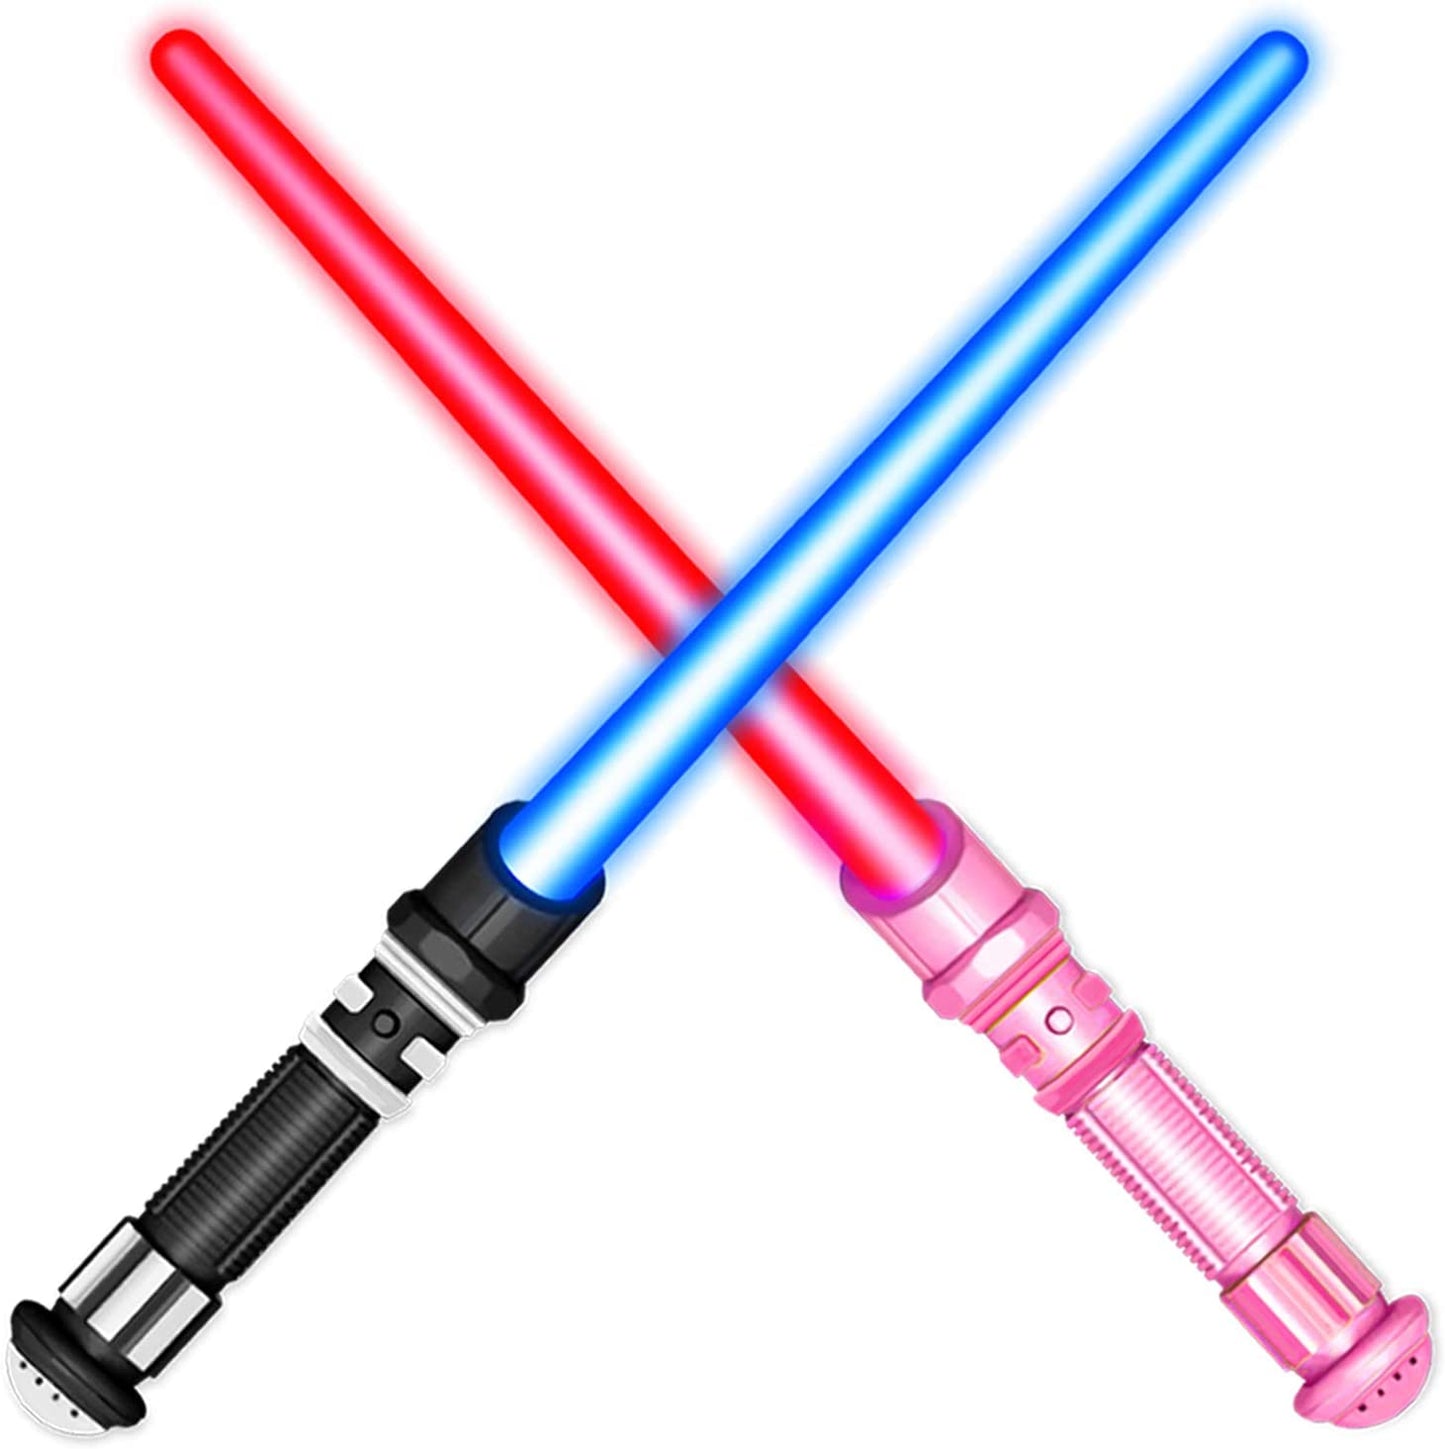 YongnKids 2 Pack Light Saber for Kids Toddlers Adults -LEDs Light Up Saber Toys with Colorful Flashing Lights & Sounds for Kids Adults Holiday Xmas Theme Party Gift Idea